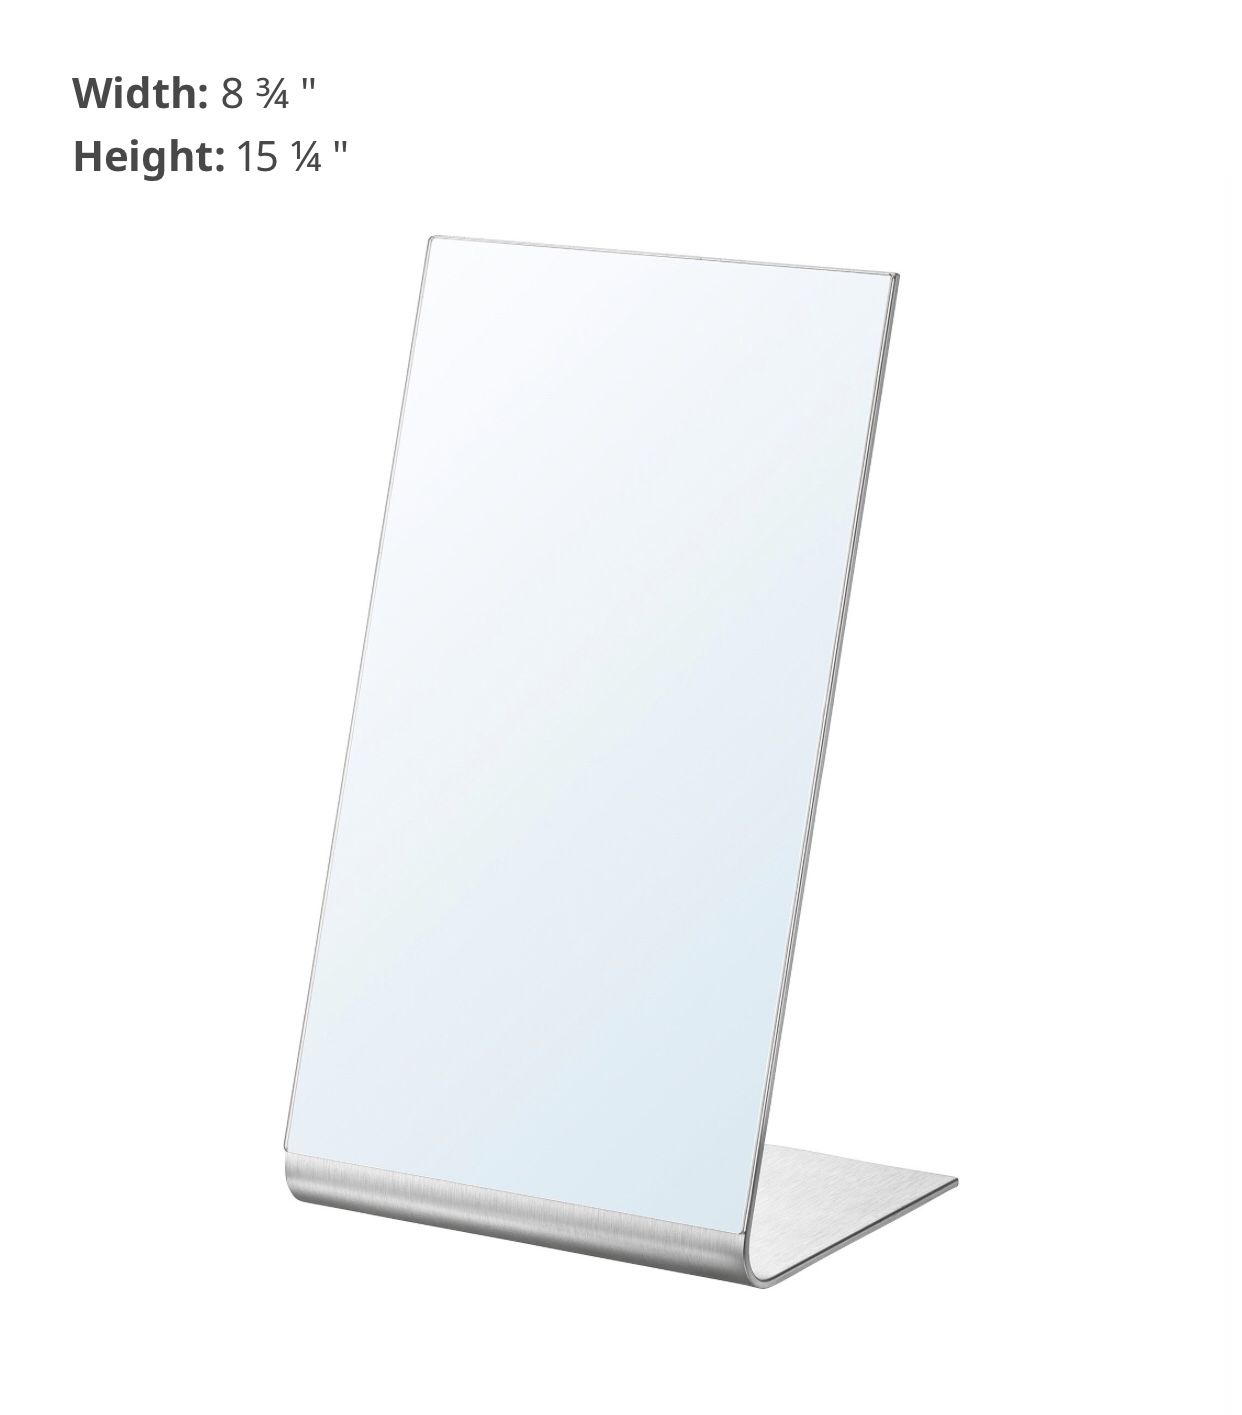 IKEA Sold Out Table Make Up mirror 8 ¾x15 ¼ "